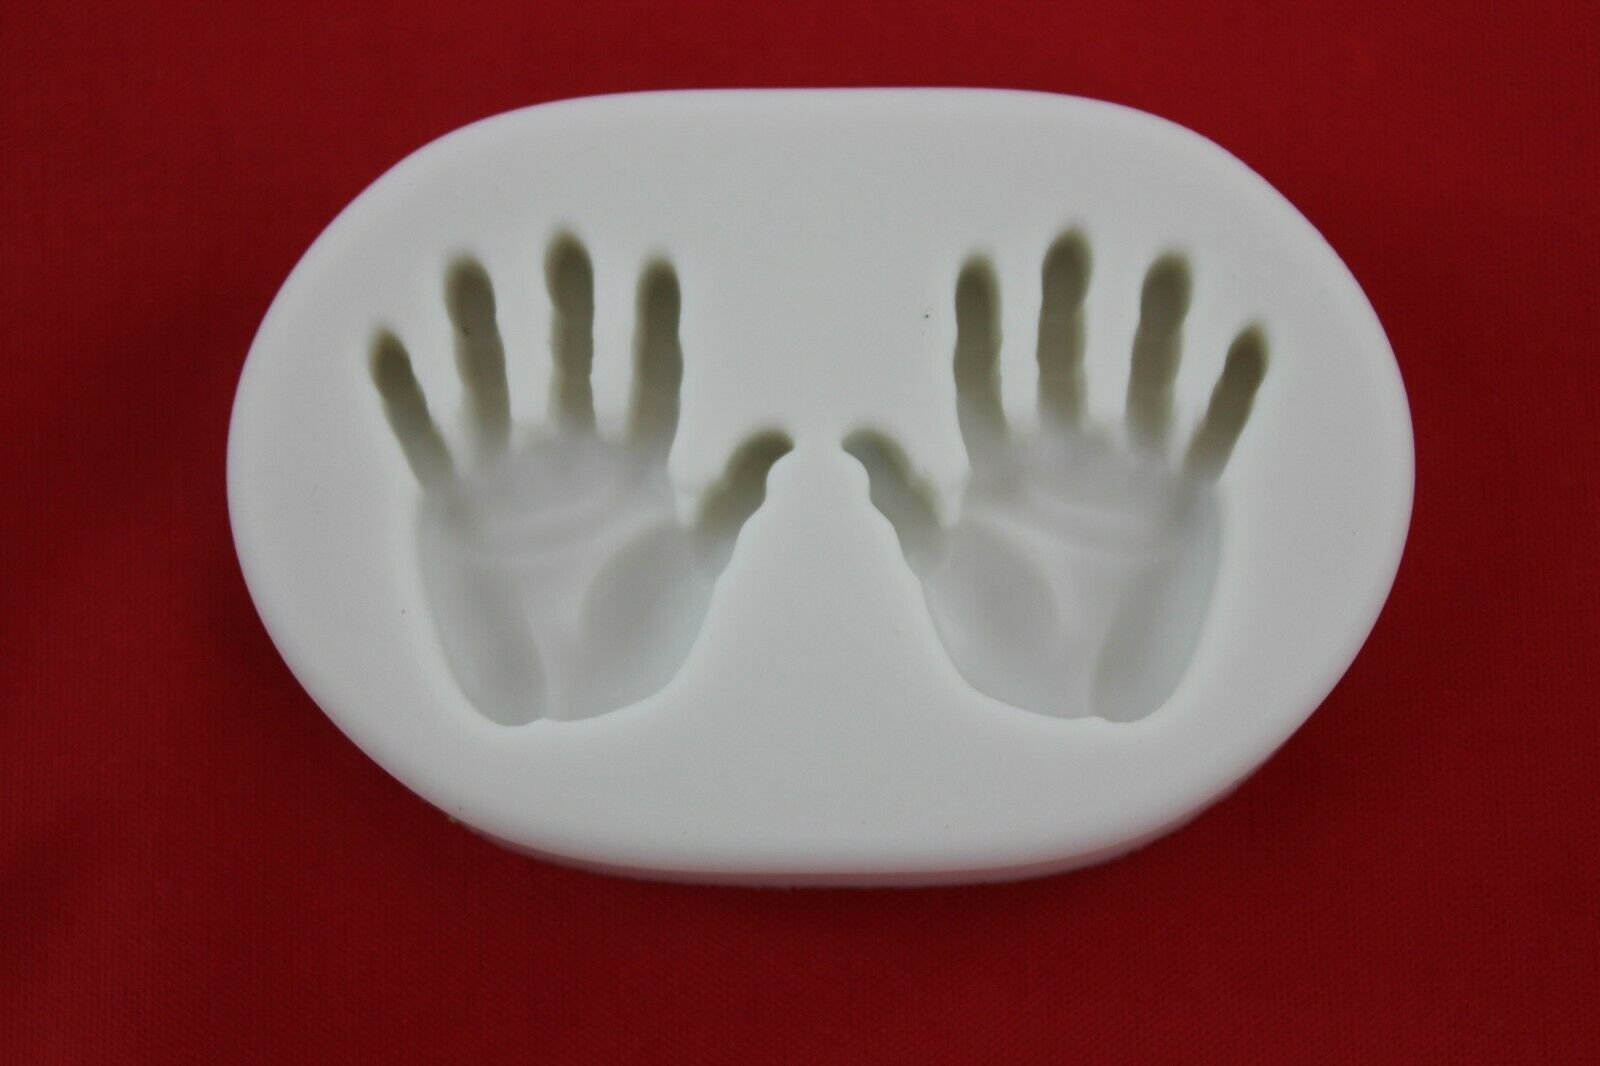 Baby Hands Pair silicone Mould Sugarcraft Cake Decorating Cake Toppers Crafts